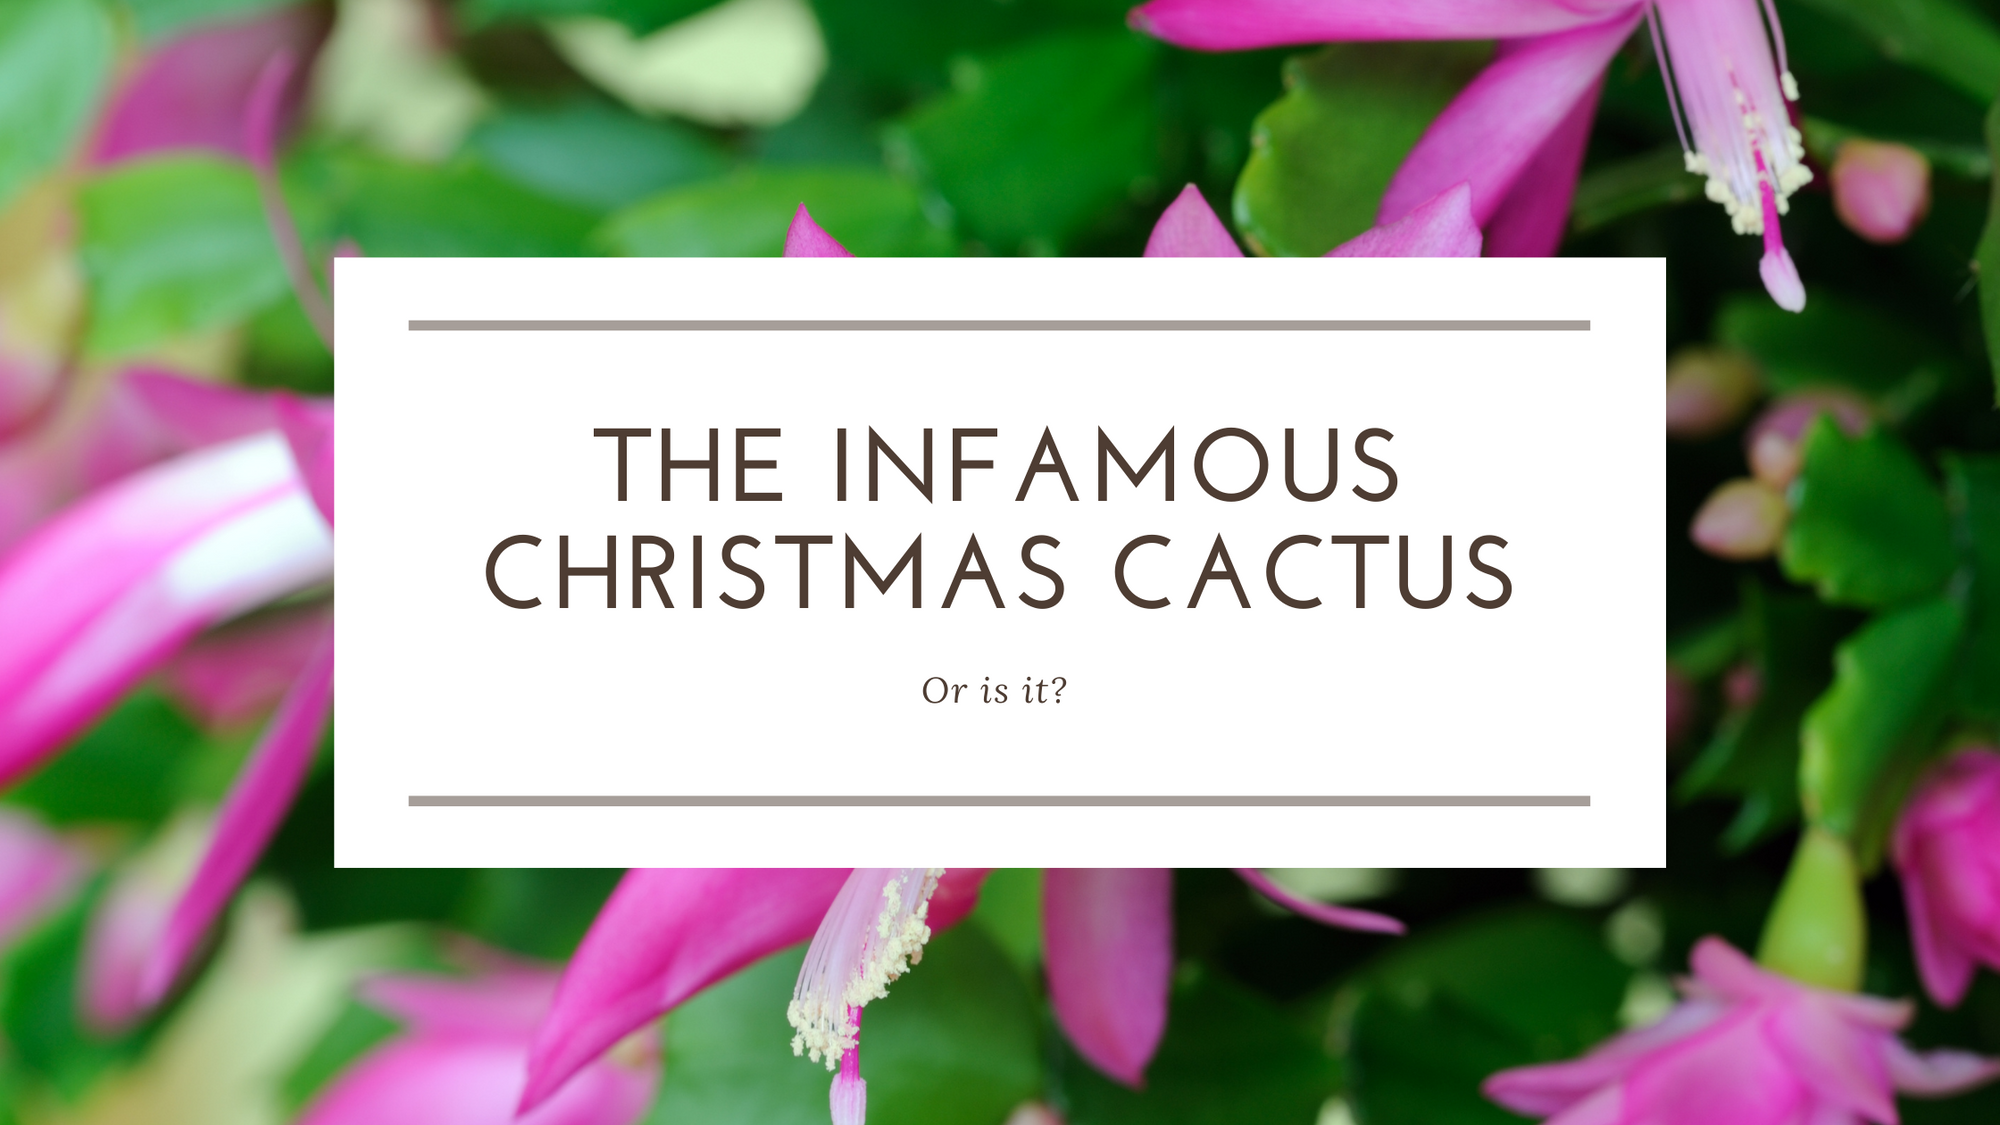 The Infamous Christmas Cactus